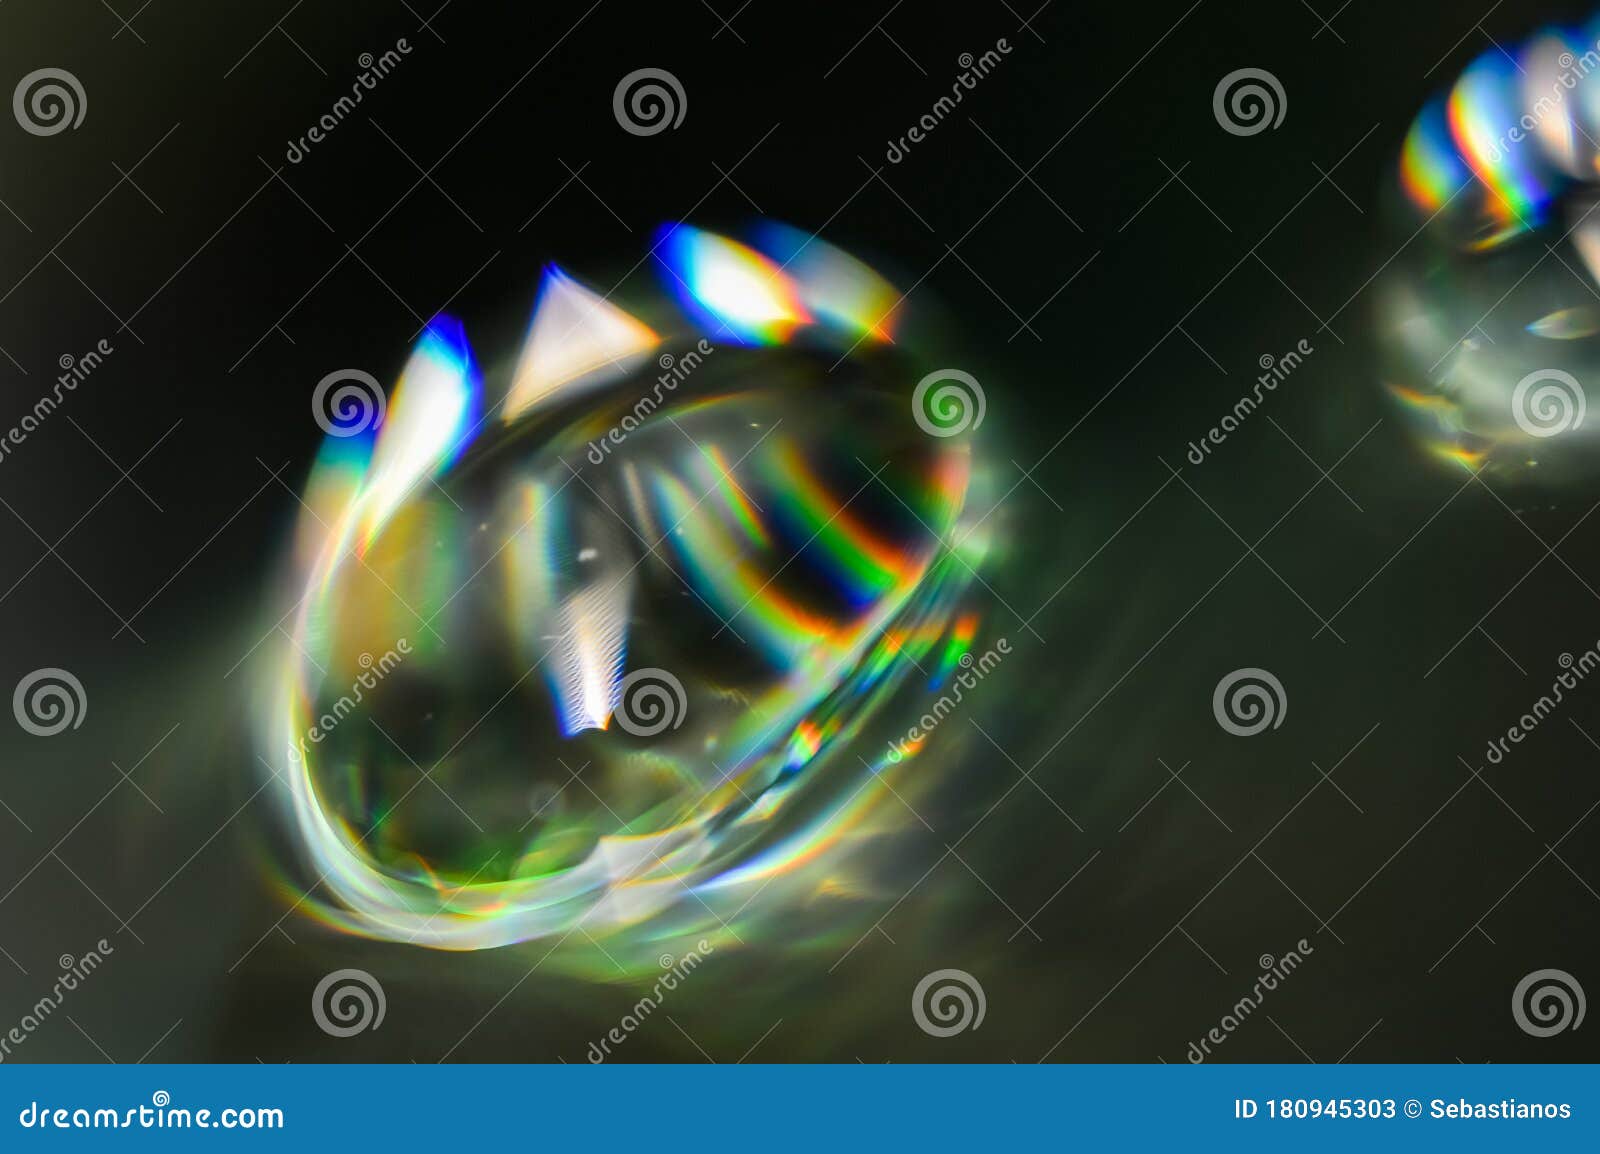  Light  Diffraction  Showing Rainbows On Water  Drops Stock 